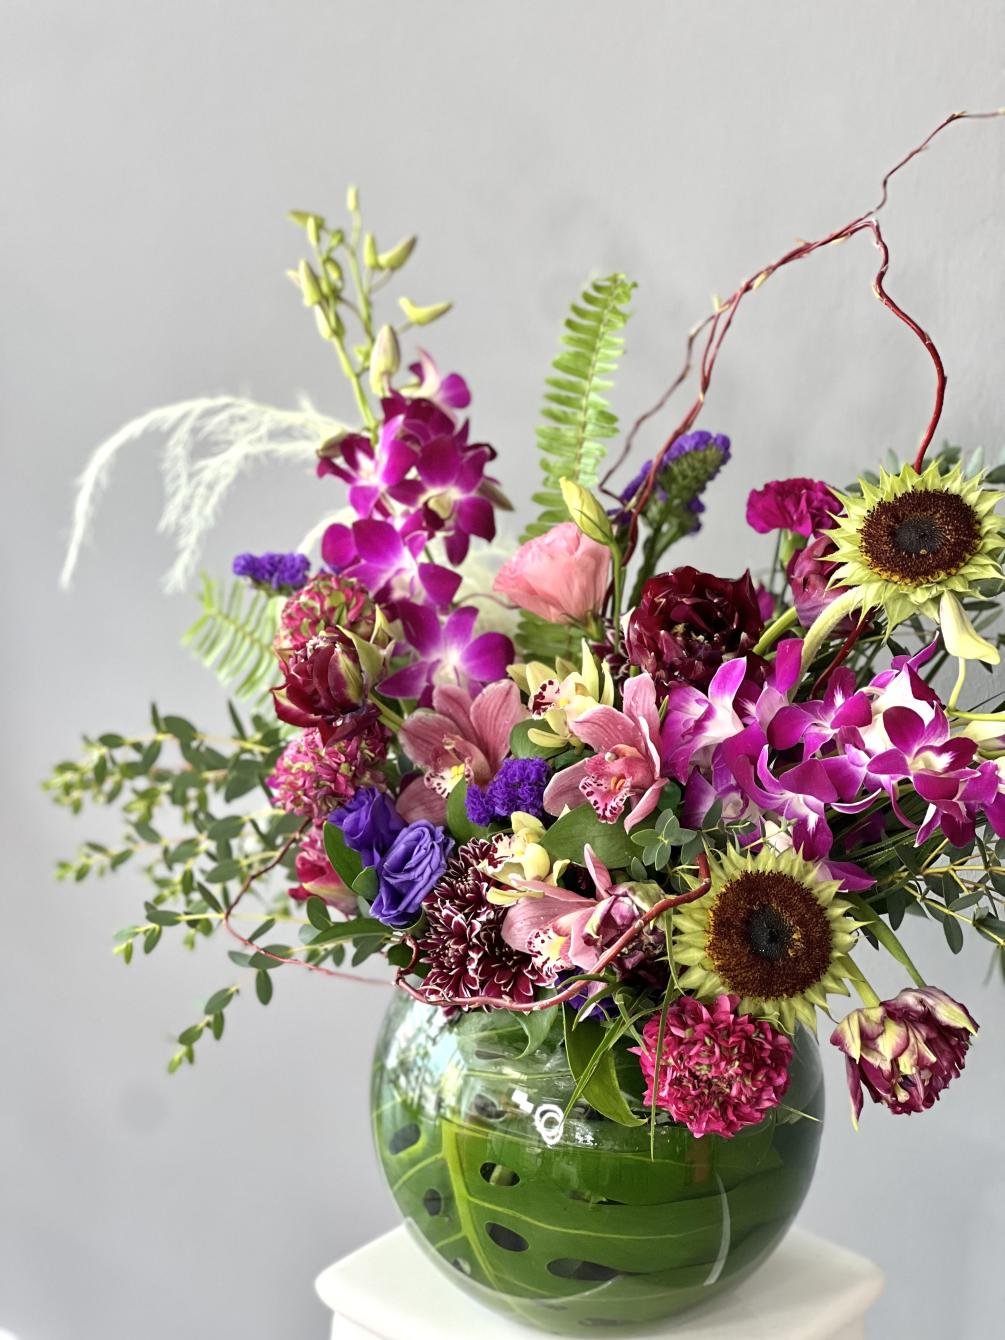 Mix of fresh flowers in green and purple tones arranged in a